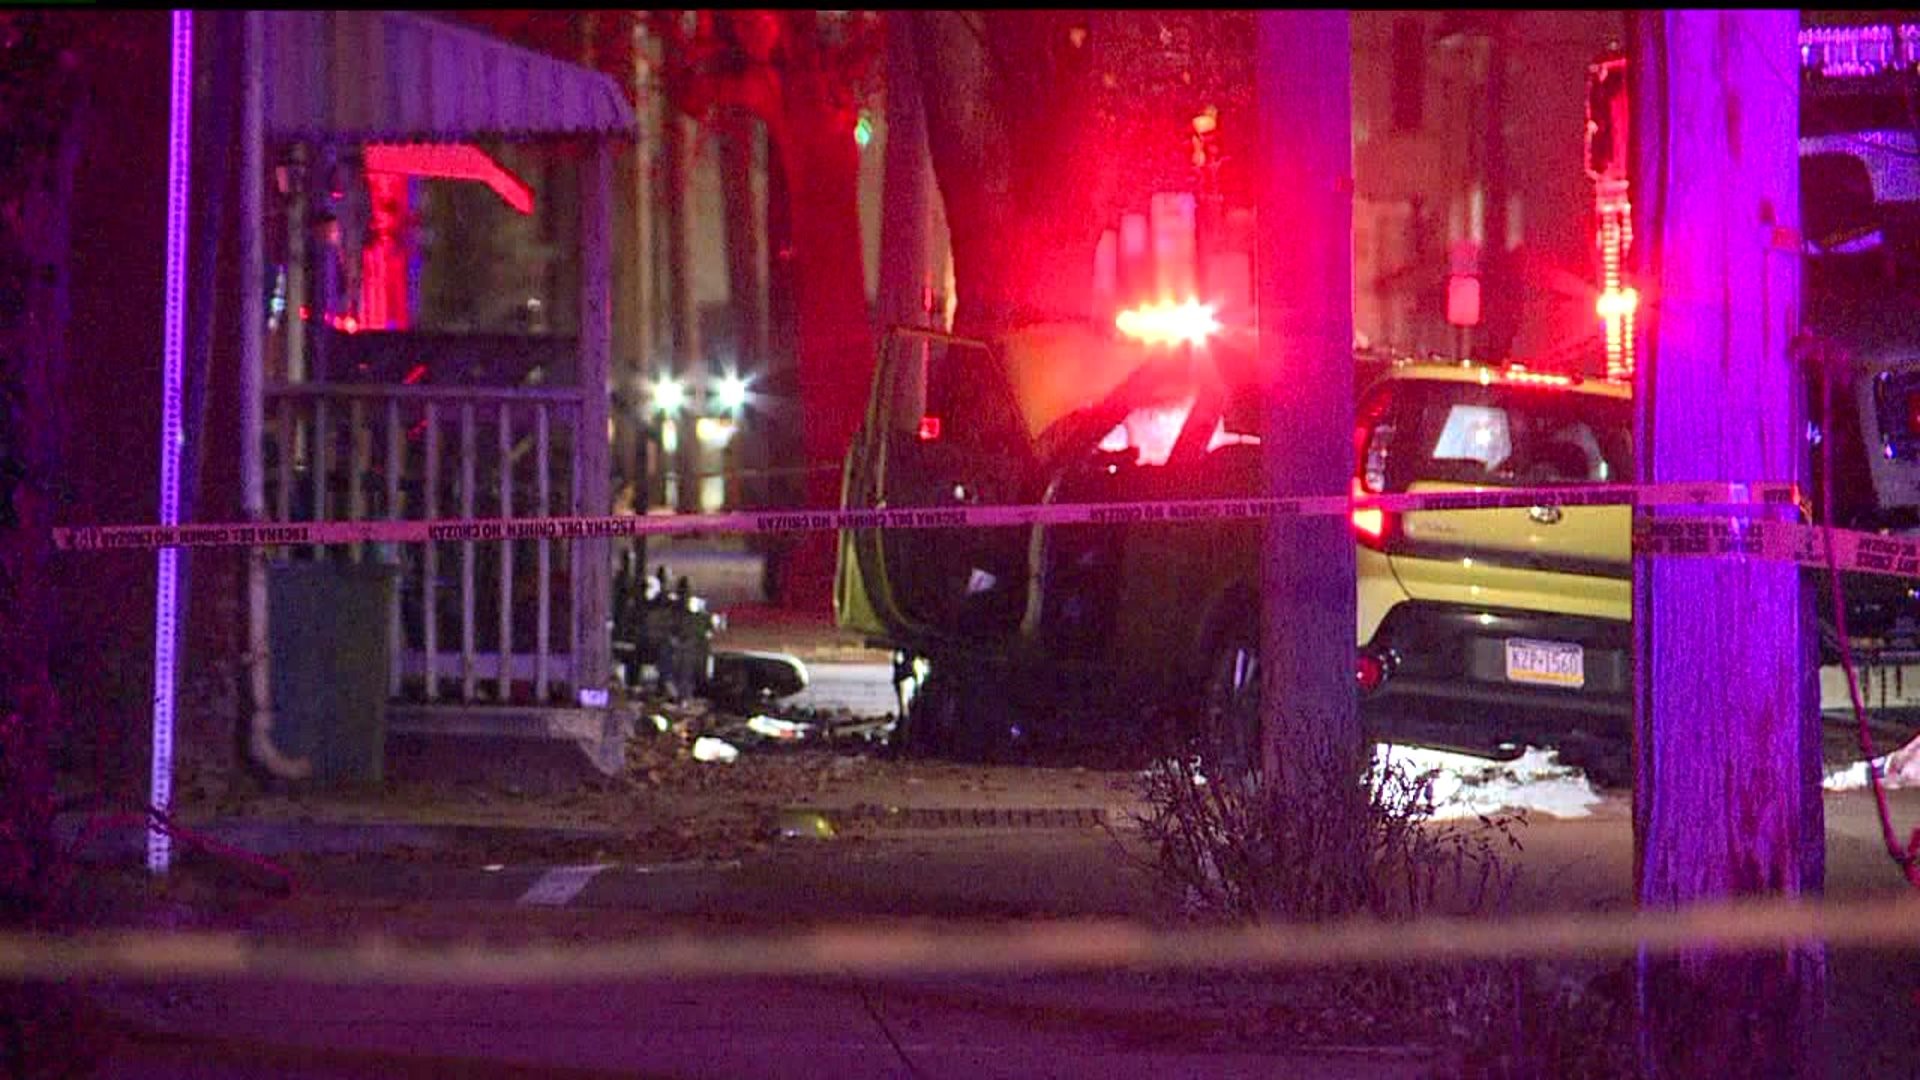 17-year-old girl killed in York City shooting; two others injured, police say